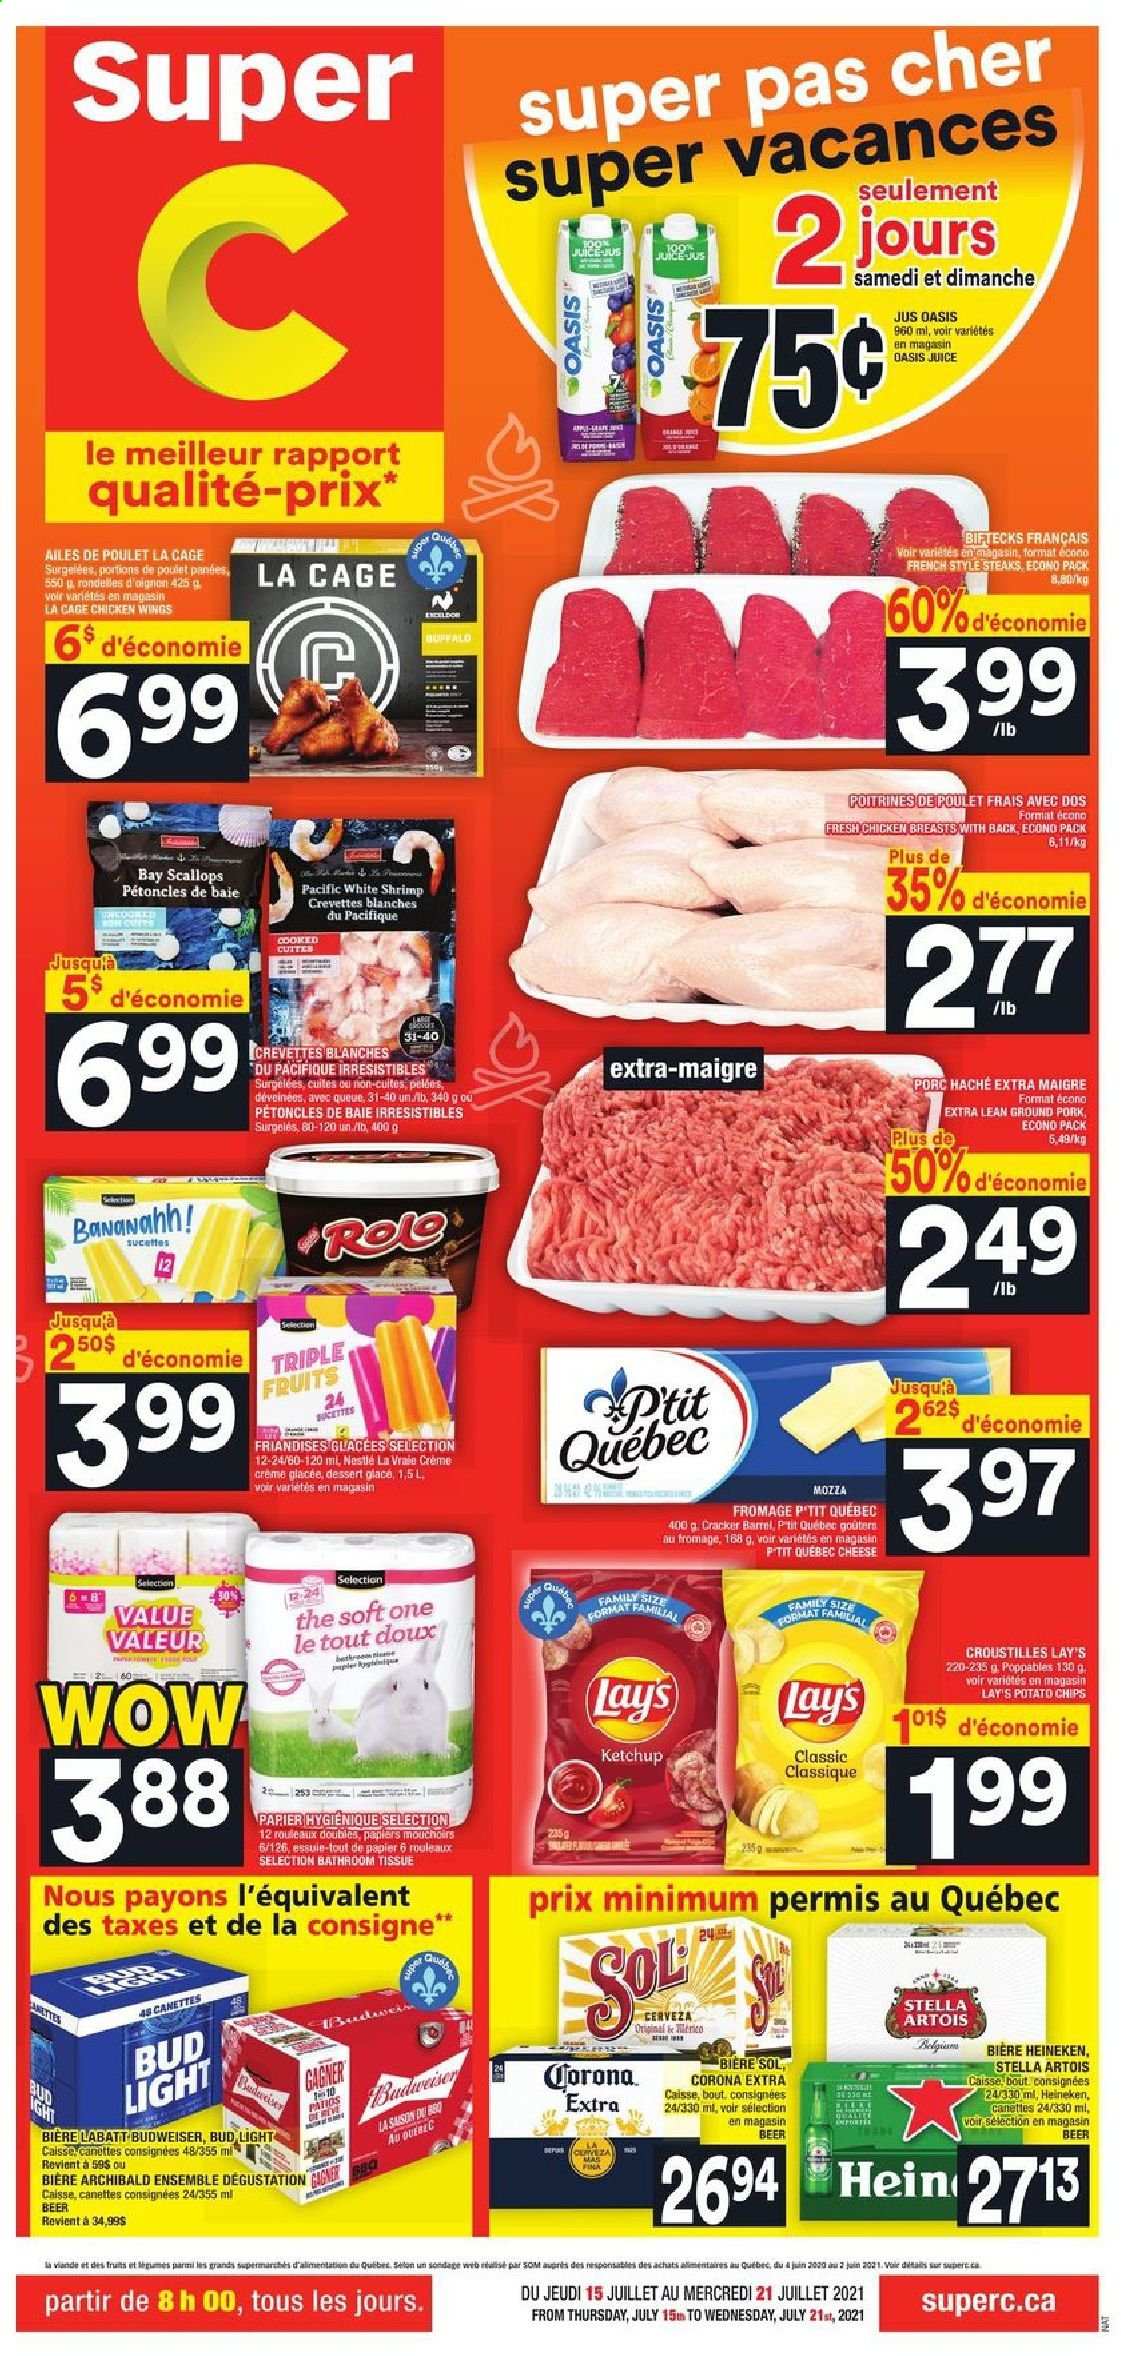 thumbnail - Super C Flyer - July 15, 2021 - July 21, 2021 - Sales products - scallops, shrimps, cheese, chicken wings, crackers, potato chips, Lay’s, juice, beer, Budweiser, Stella Artois, Bud Light, Corona Extra, Heineken, Sol, chicken breasts, ground pork, bath tissue, chips, steak. Page 1.